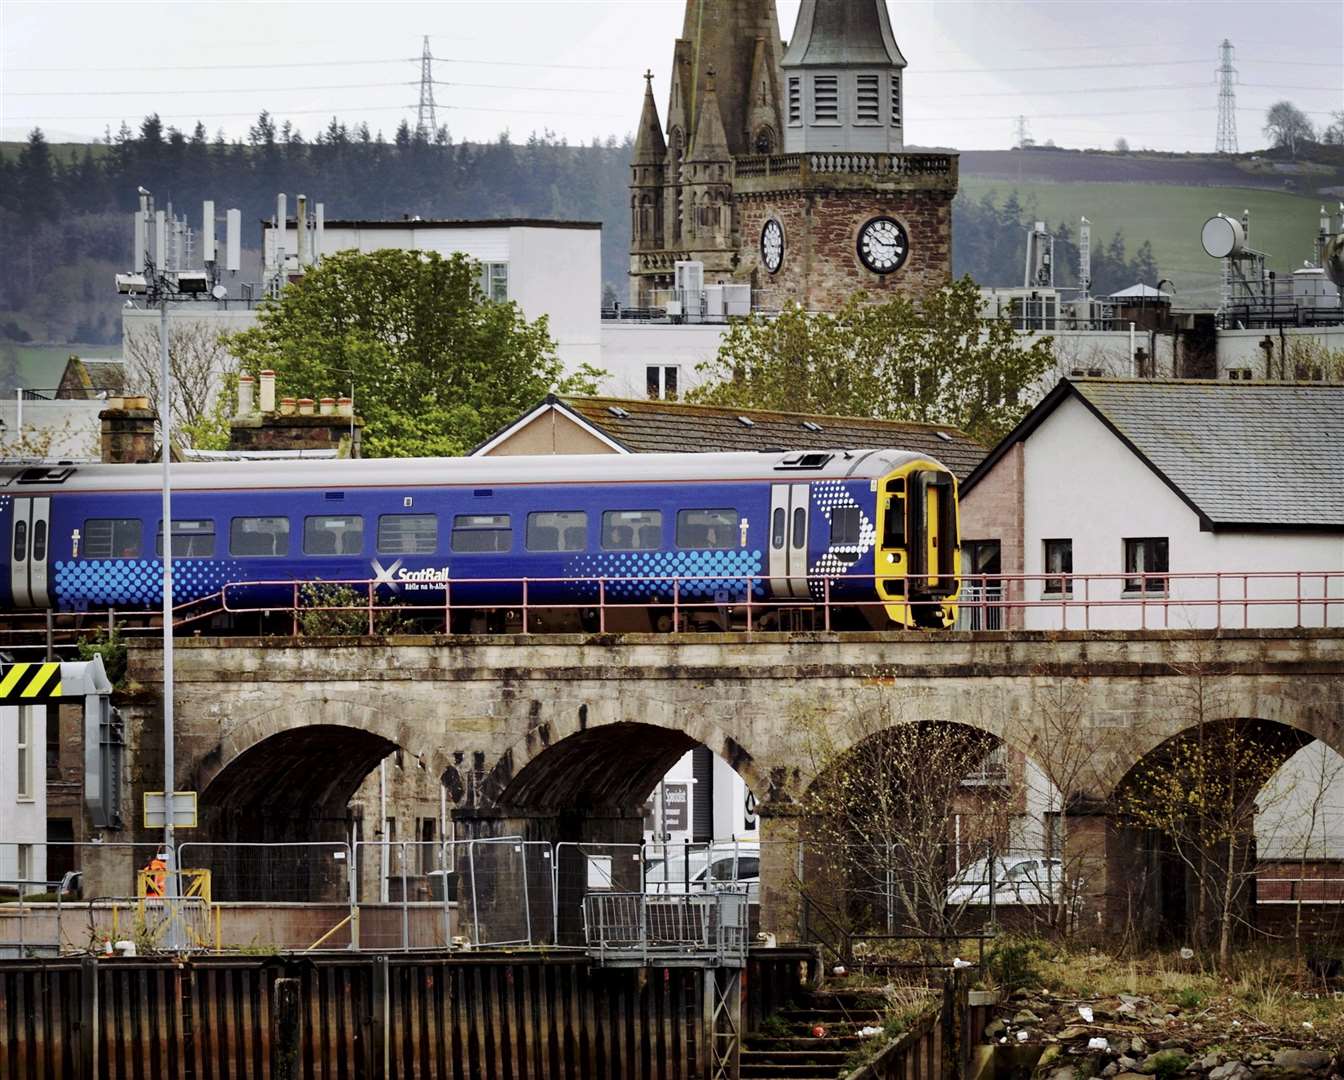 A Scotrail train heads out of Inverness city centre on the northern line. Picture: Gary Anthony